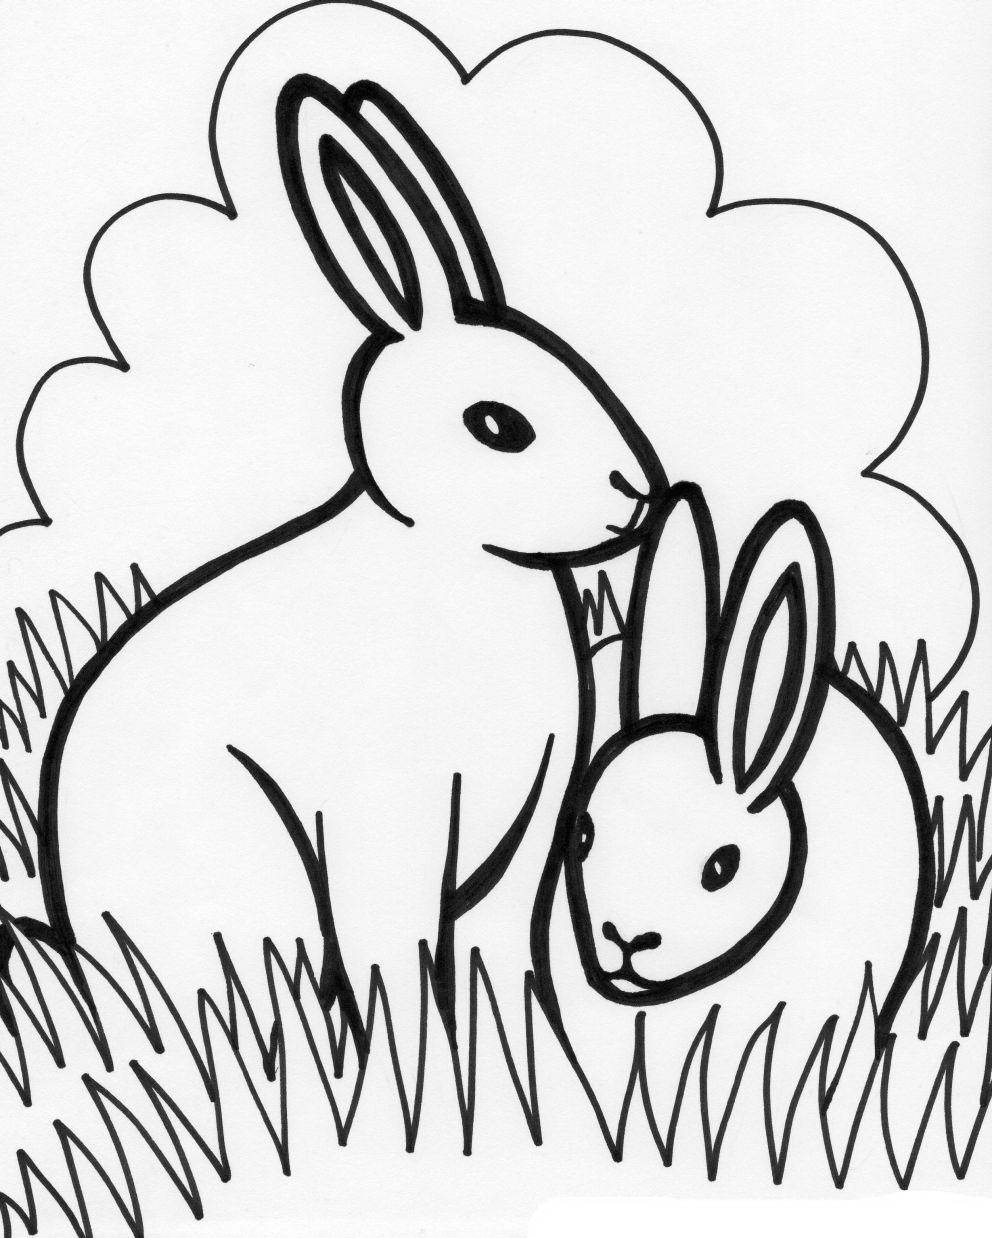 Coloring Drawing bunnies in the meadow. Category Pets allowed. Tags:  hare, rabbit.